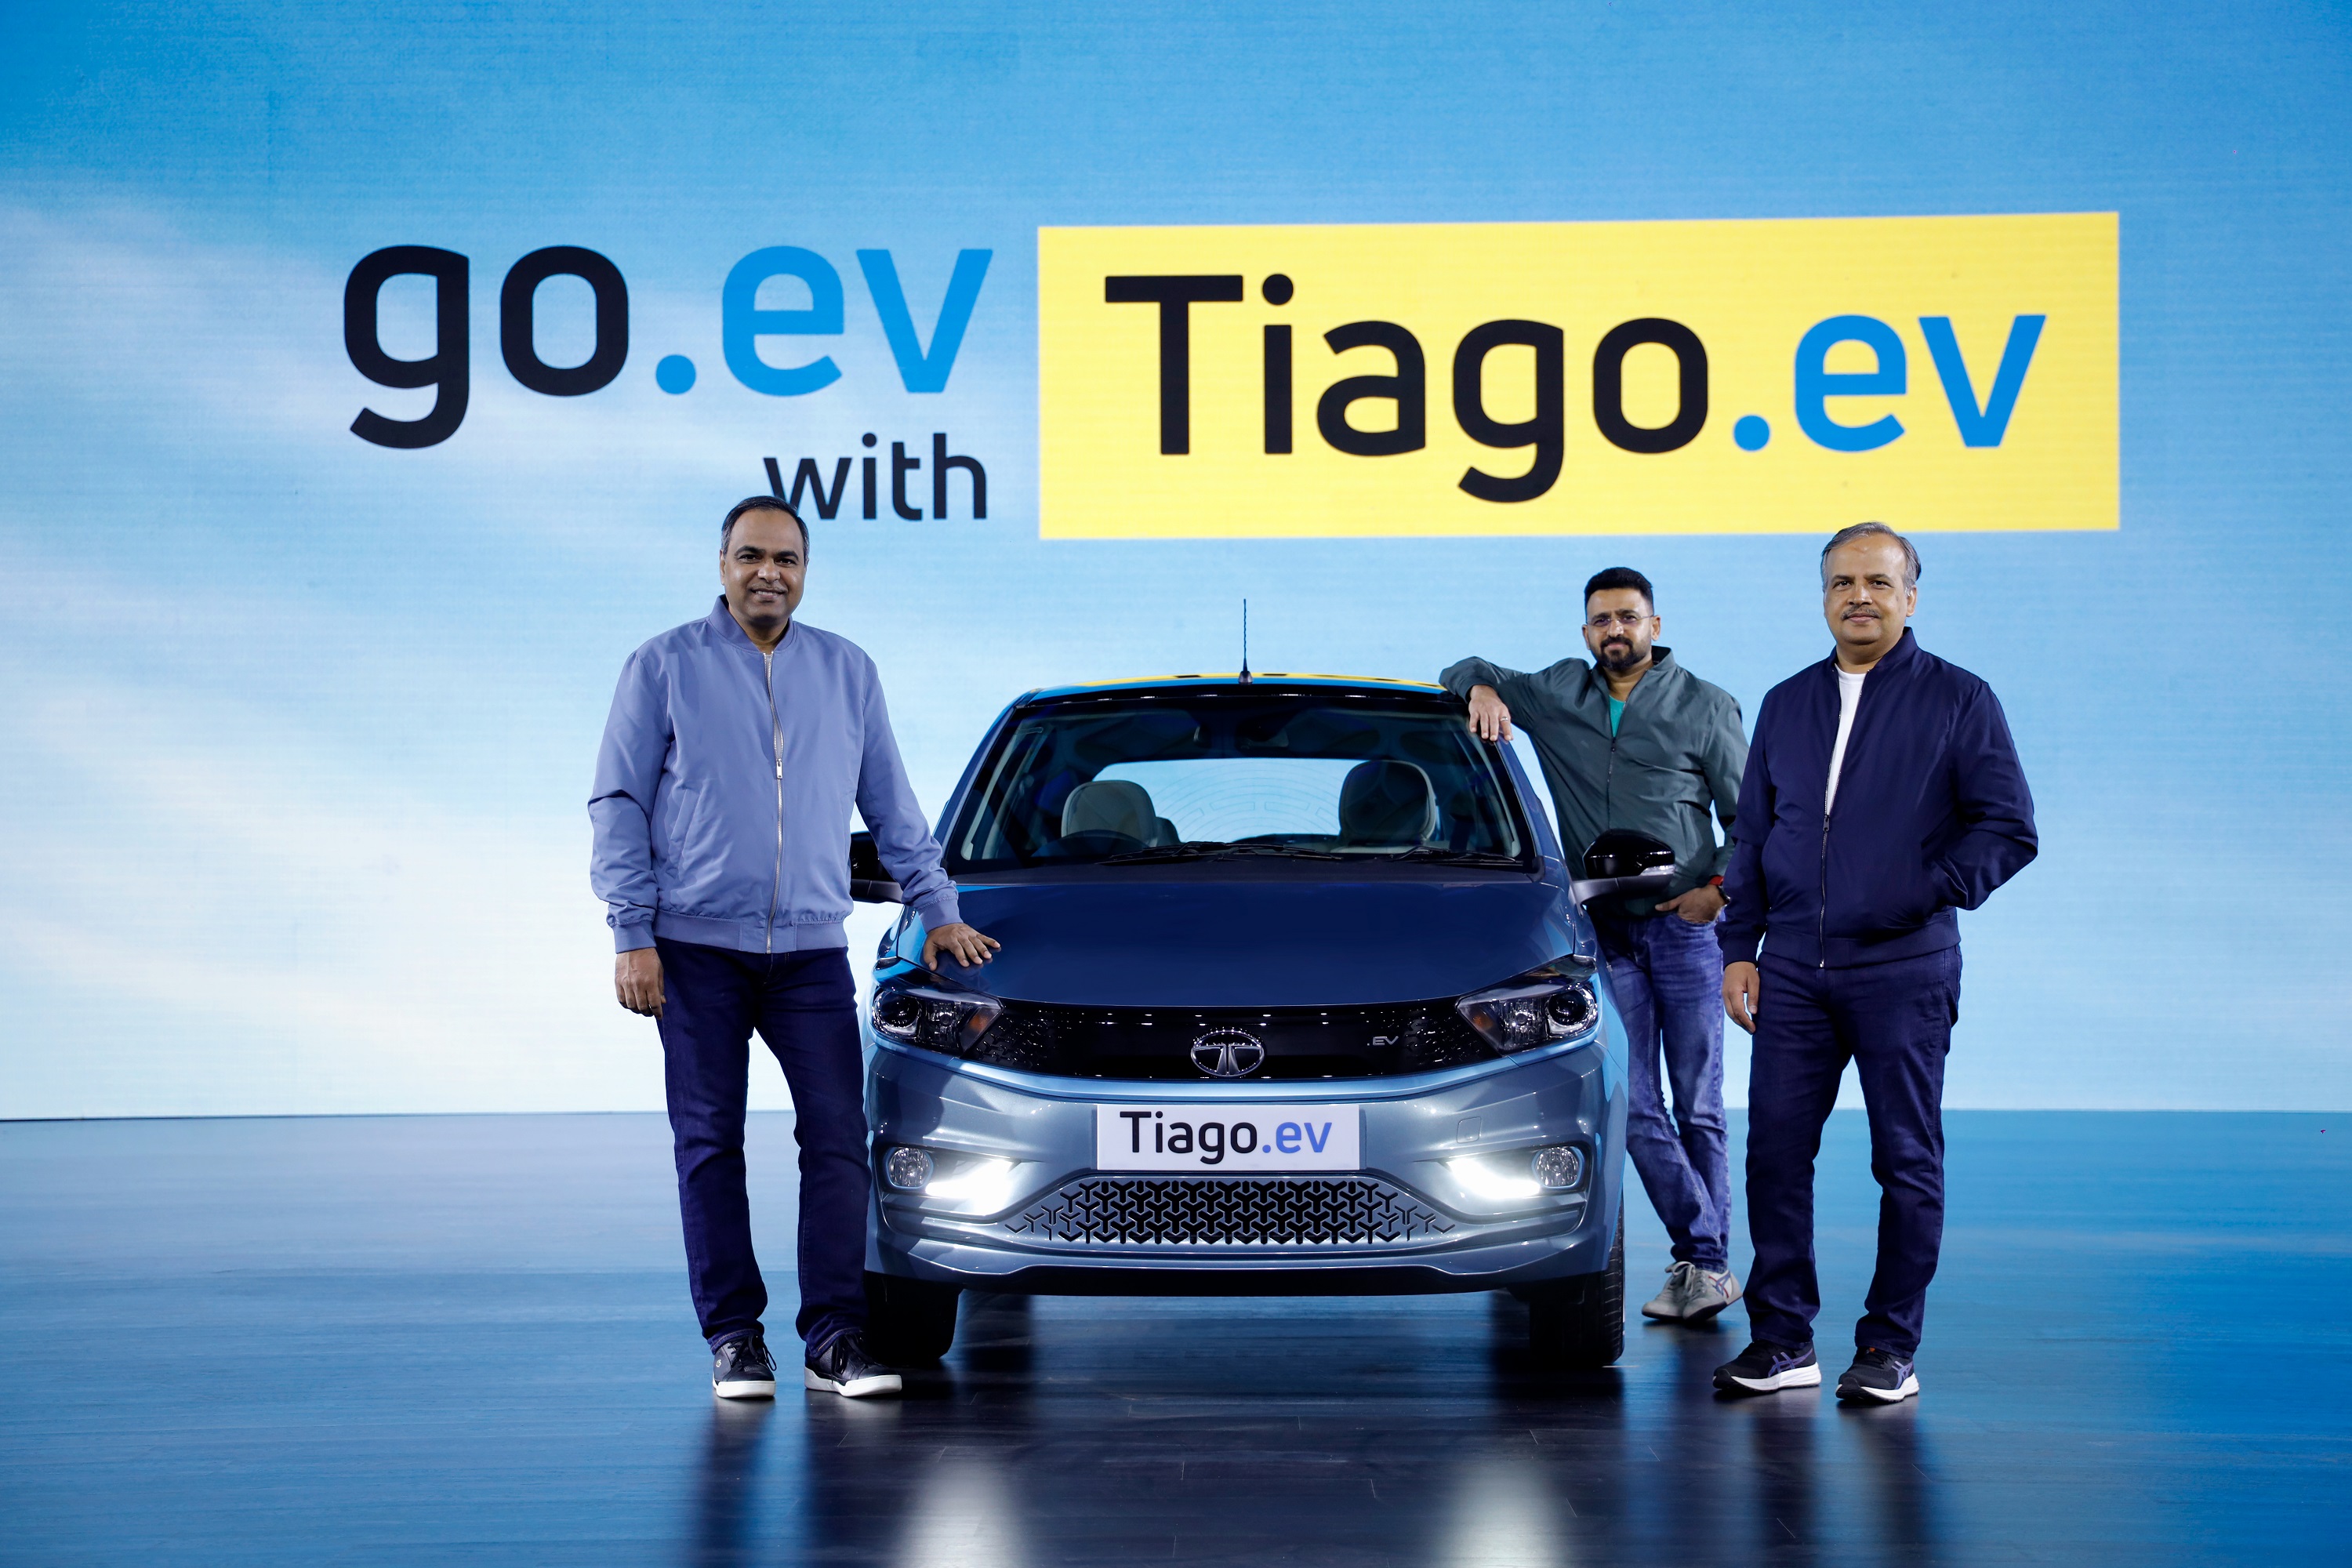 Get ready to Go.ev with Tiago.ev!  Tata Motors launches its first electric hatch with segment-first, premium features   Price starts at 8.49 Lakh